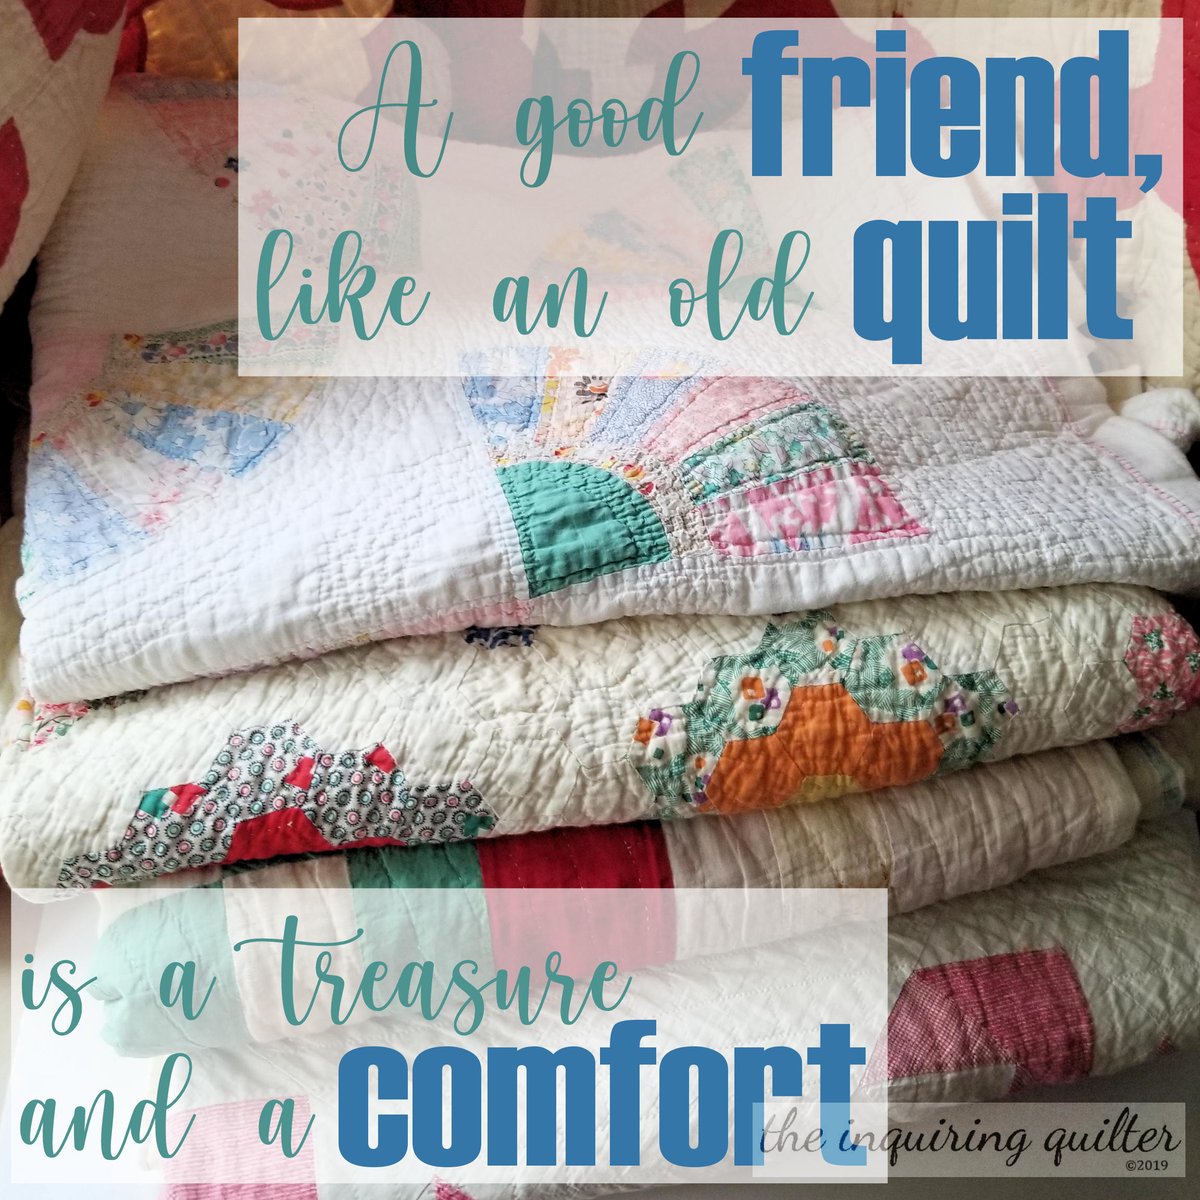 Hello friends, old and new! #inquiringquilter #quiltingismytherapy #quiltingismybliss #quotestoliveby #quoteoftheday #quotes #quotesaboutlife #behappyandsmile #findyourjoy #quiltquotes